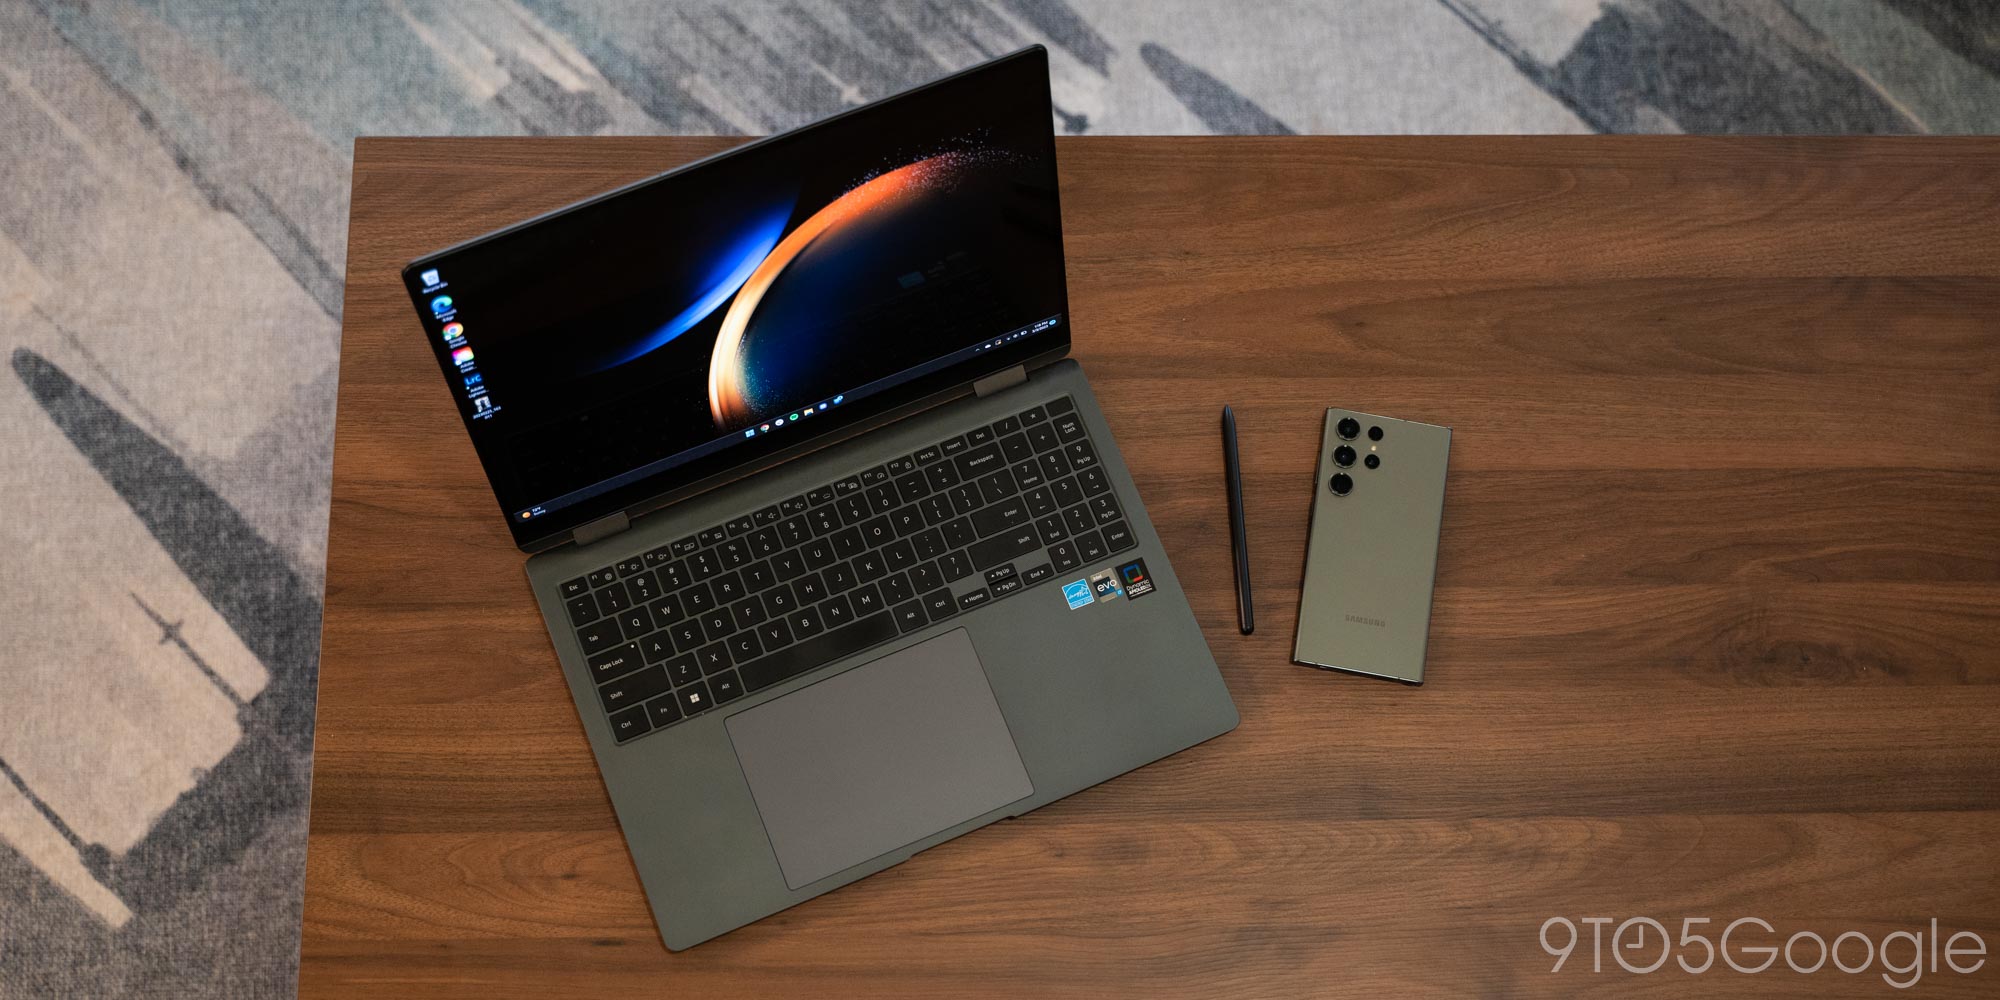 Samsung Galaxy Book 3 Pro Review: Delight For On-The-Go Users